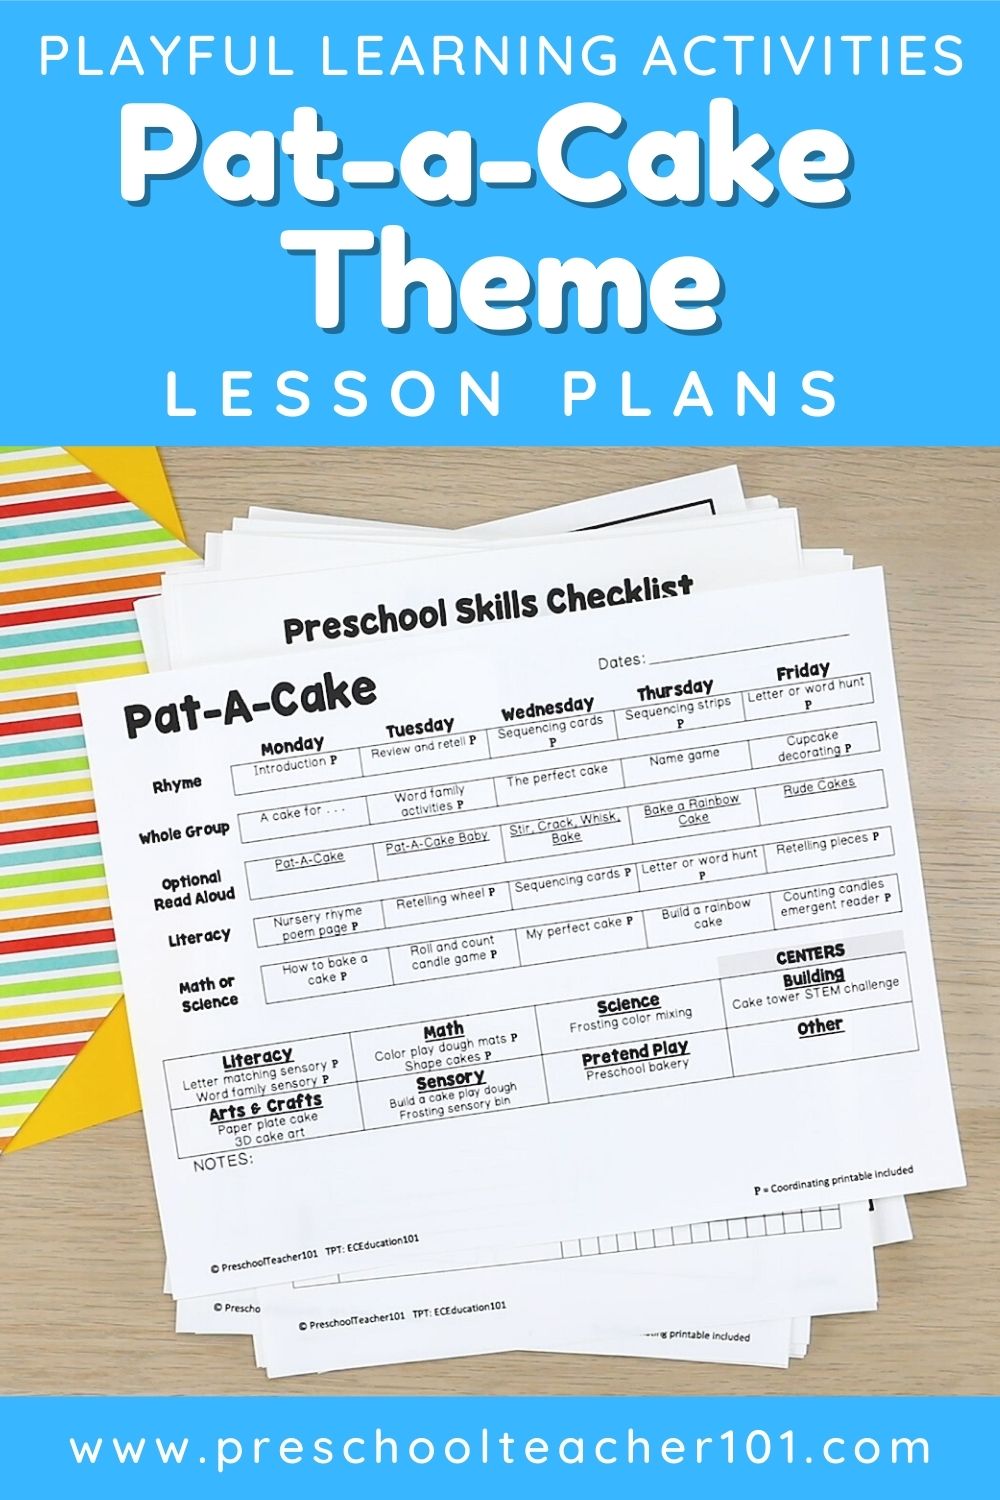 Playful Learning Activities - Pat-a-Cake Theme